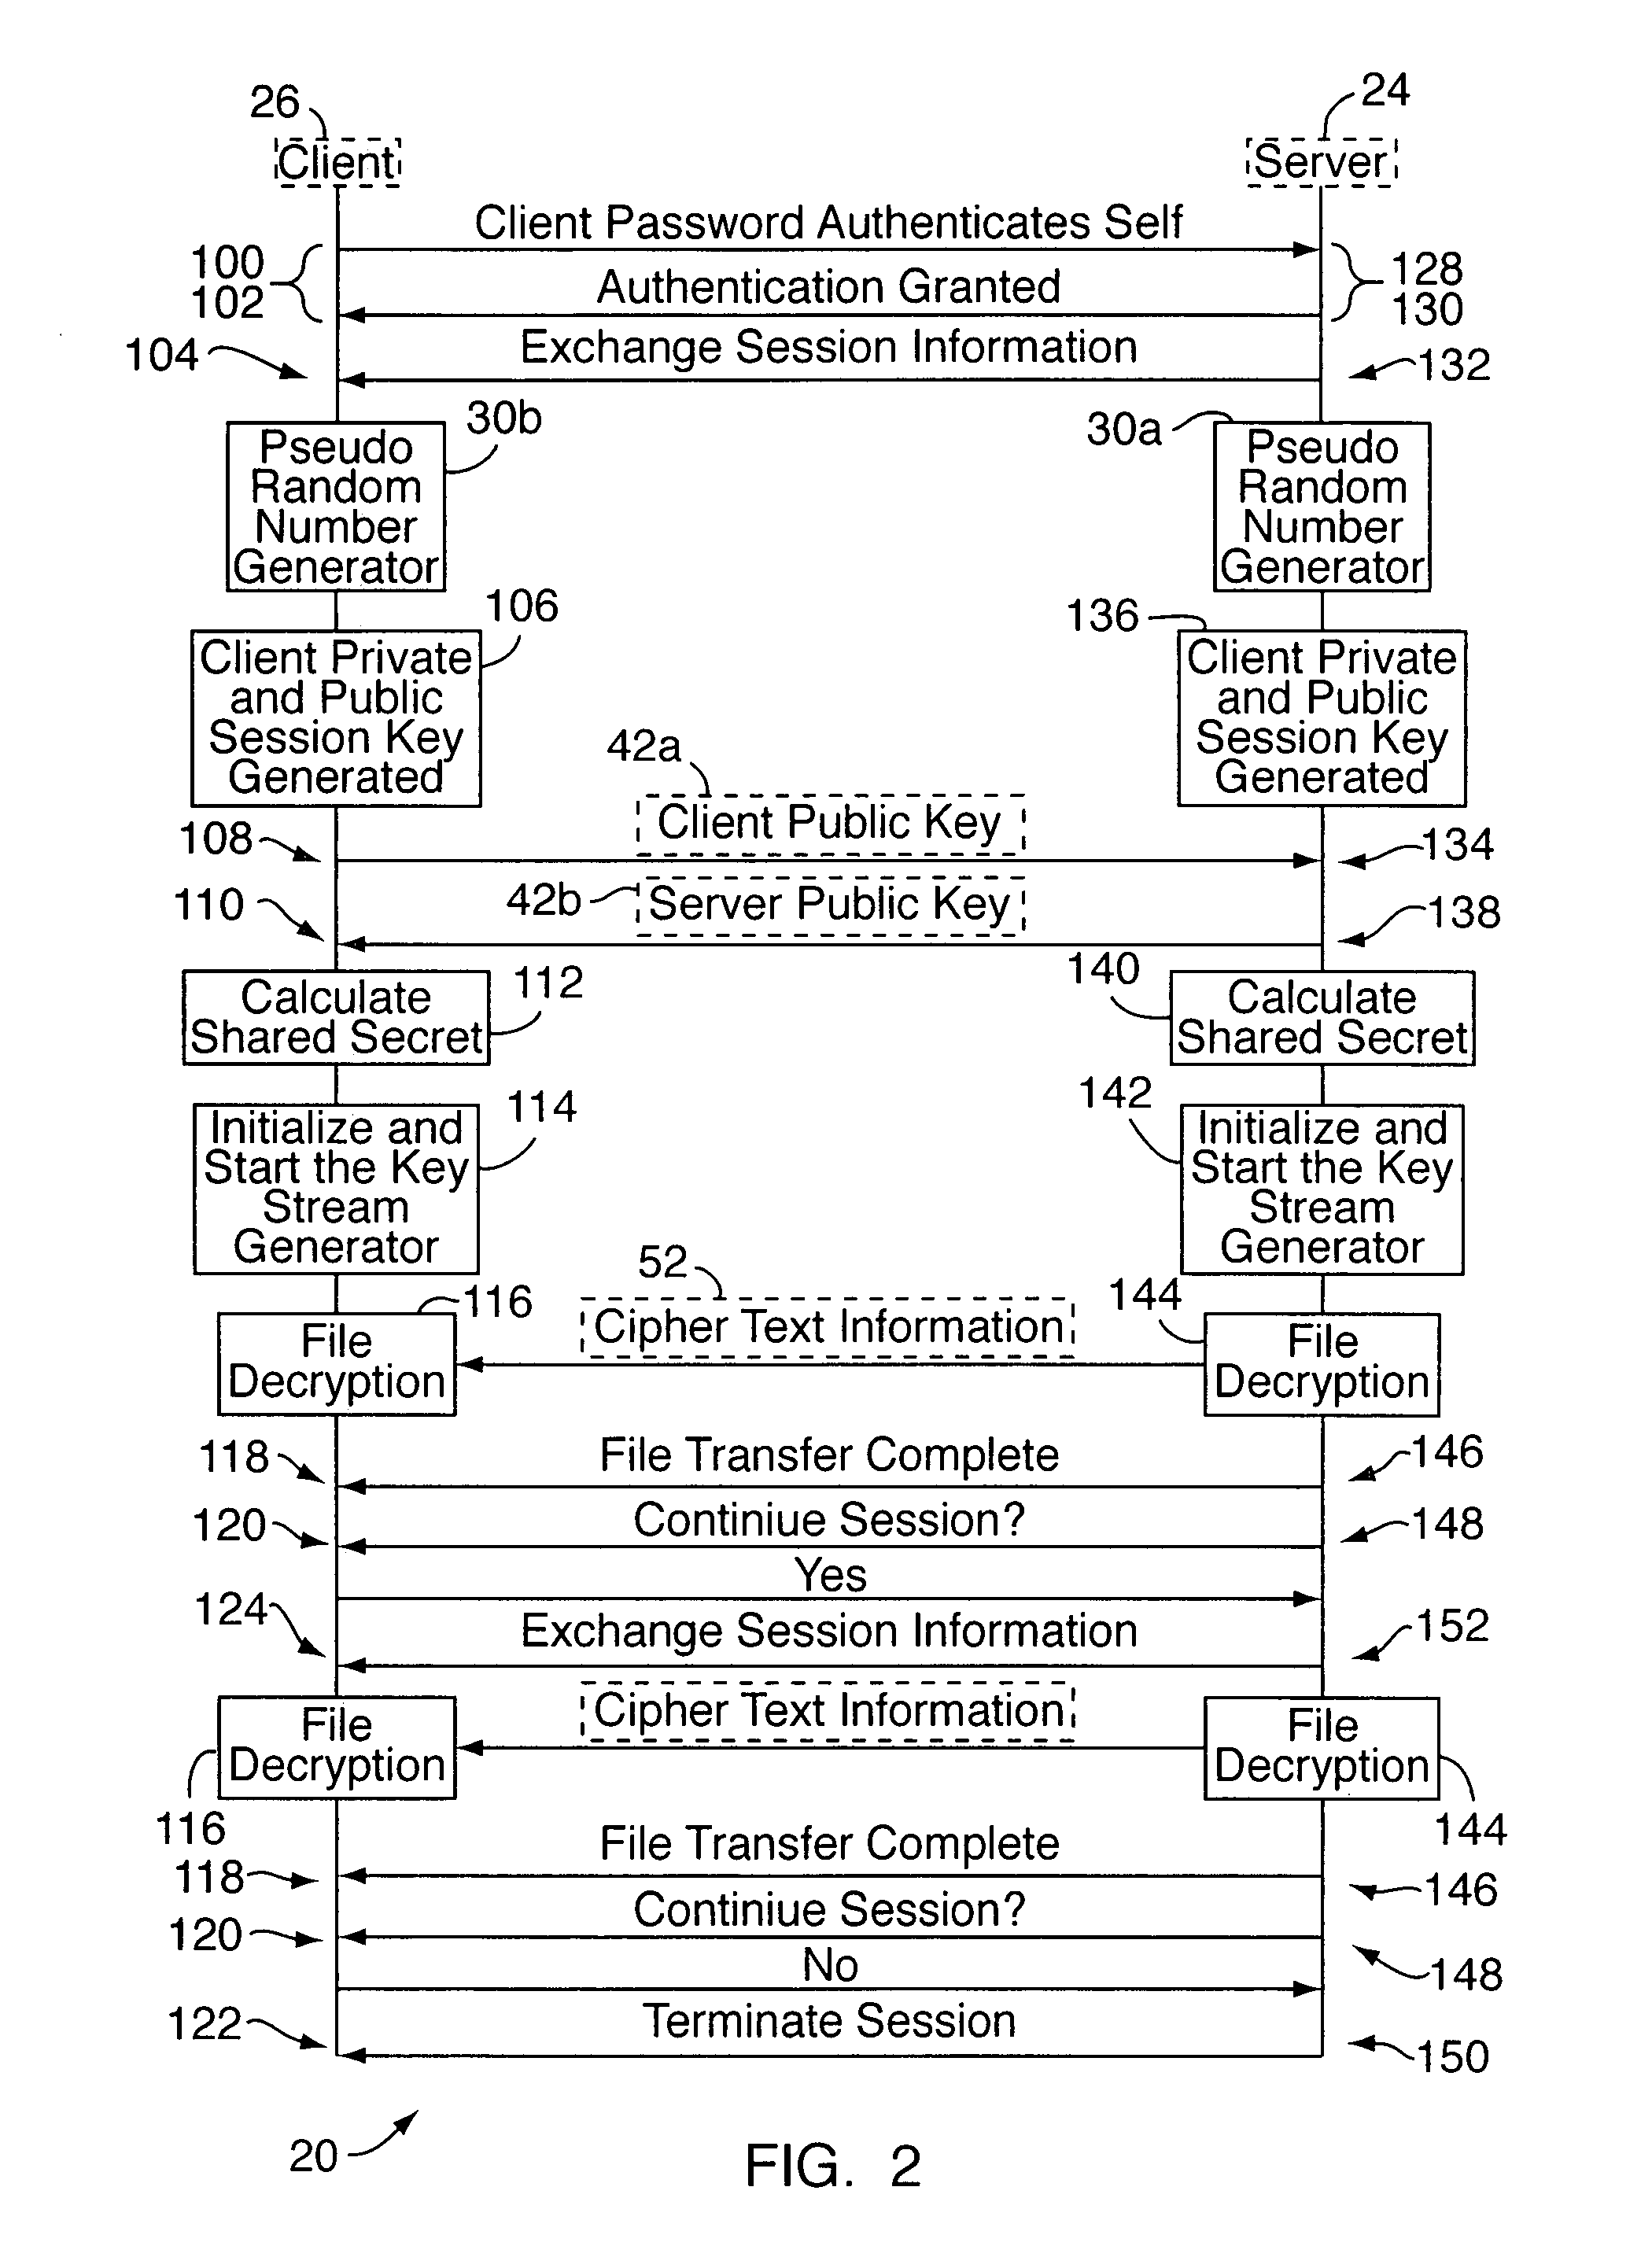 Dual-mode variable key length cryptography system